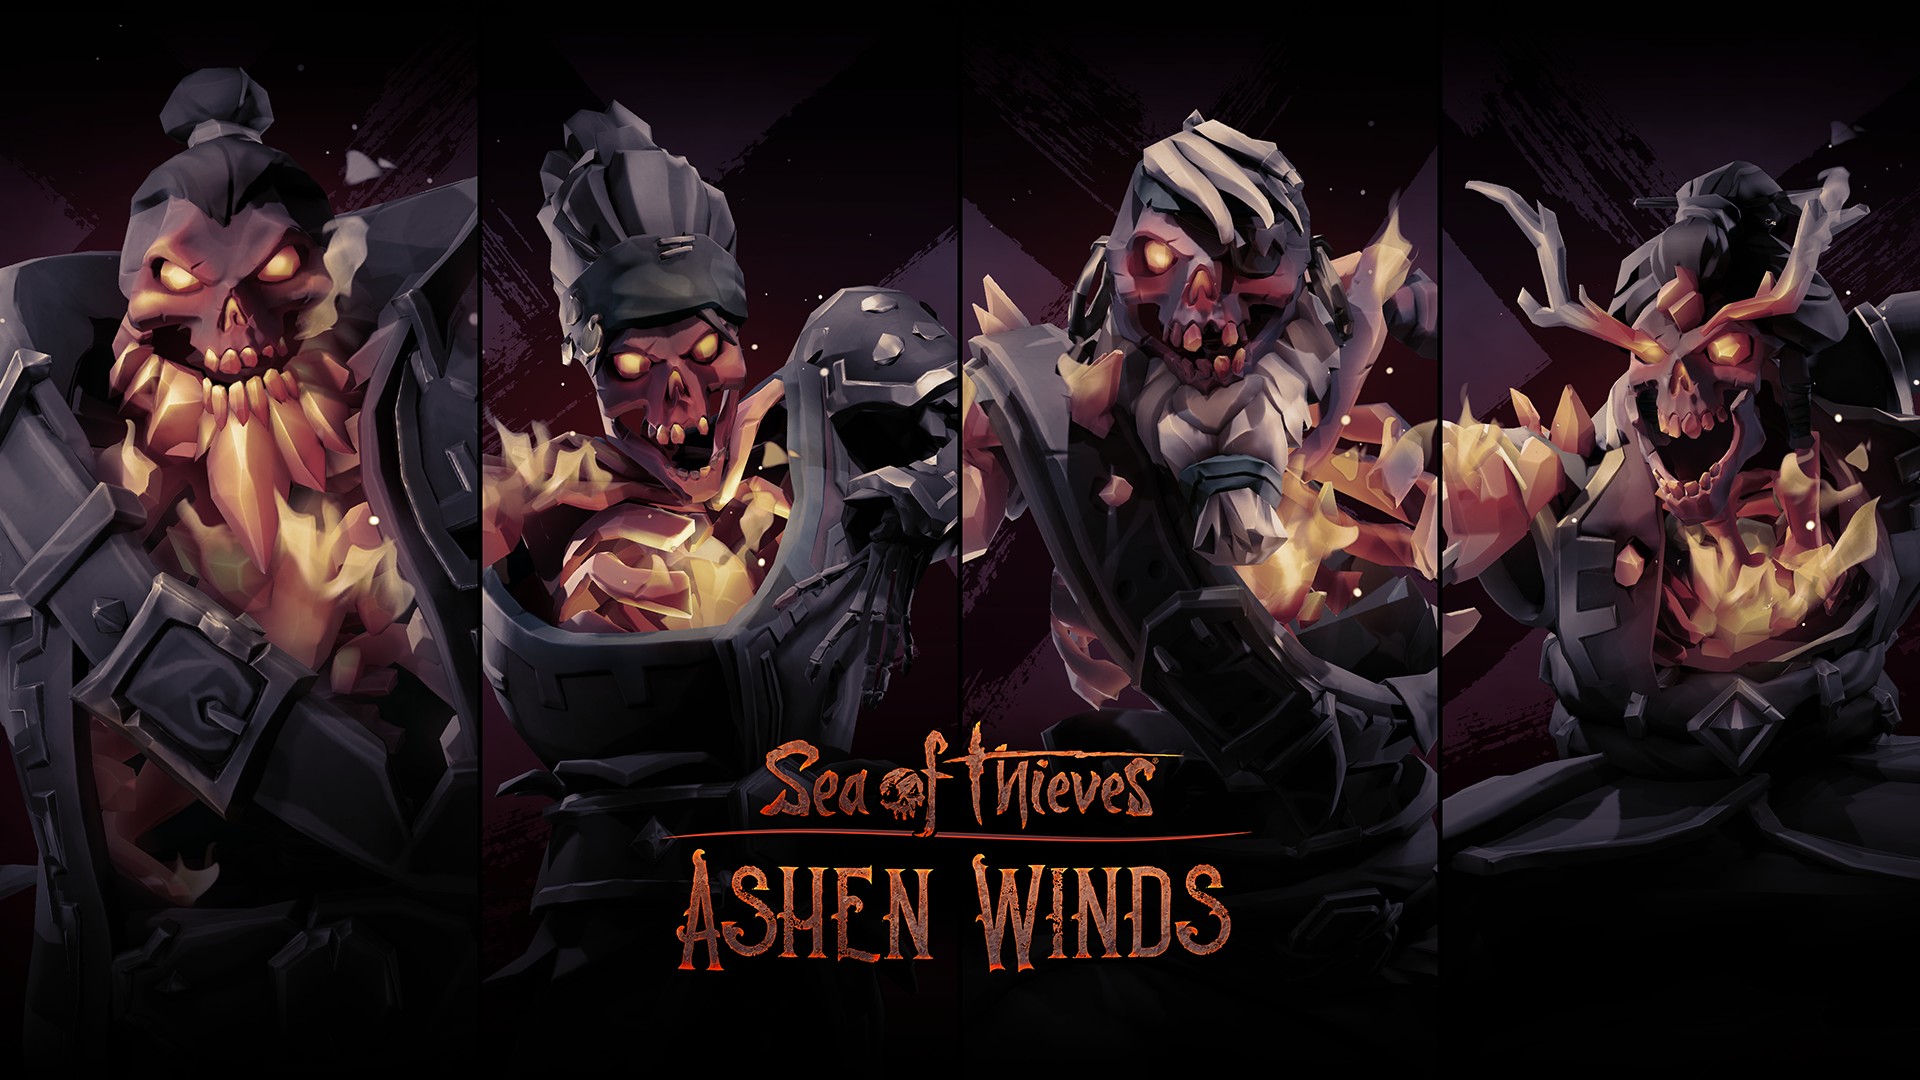 Video For Ashen Lords Land on the Sea of Thieves in July’s Free Ashen Winds Update